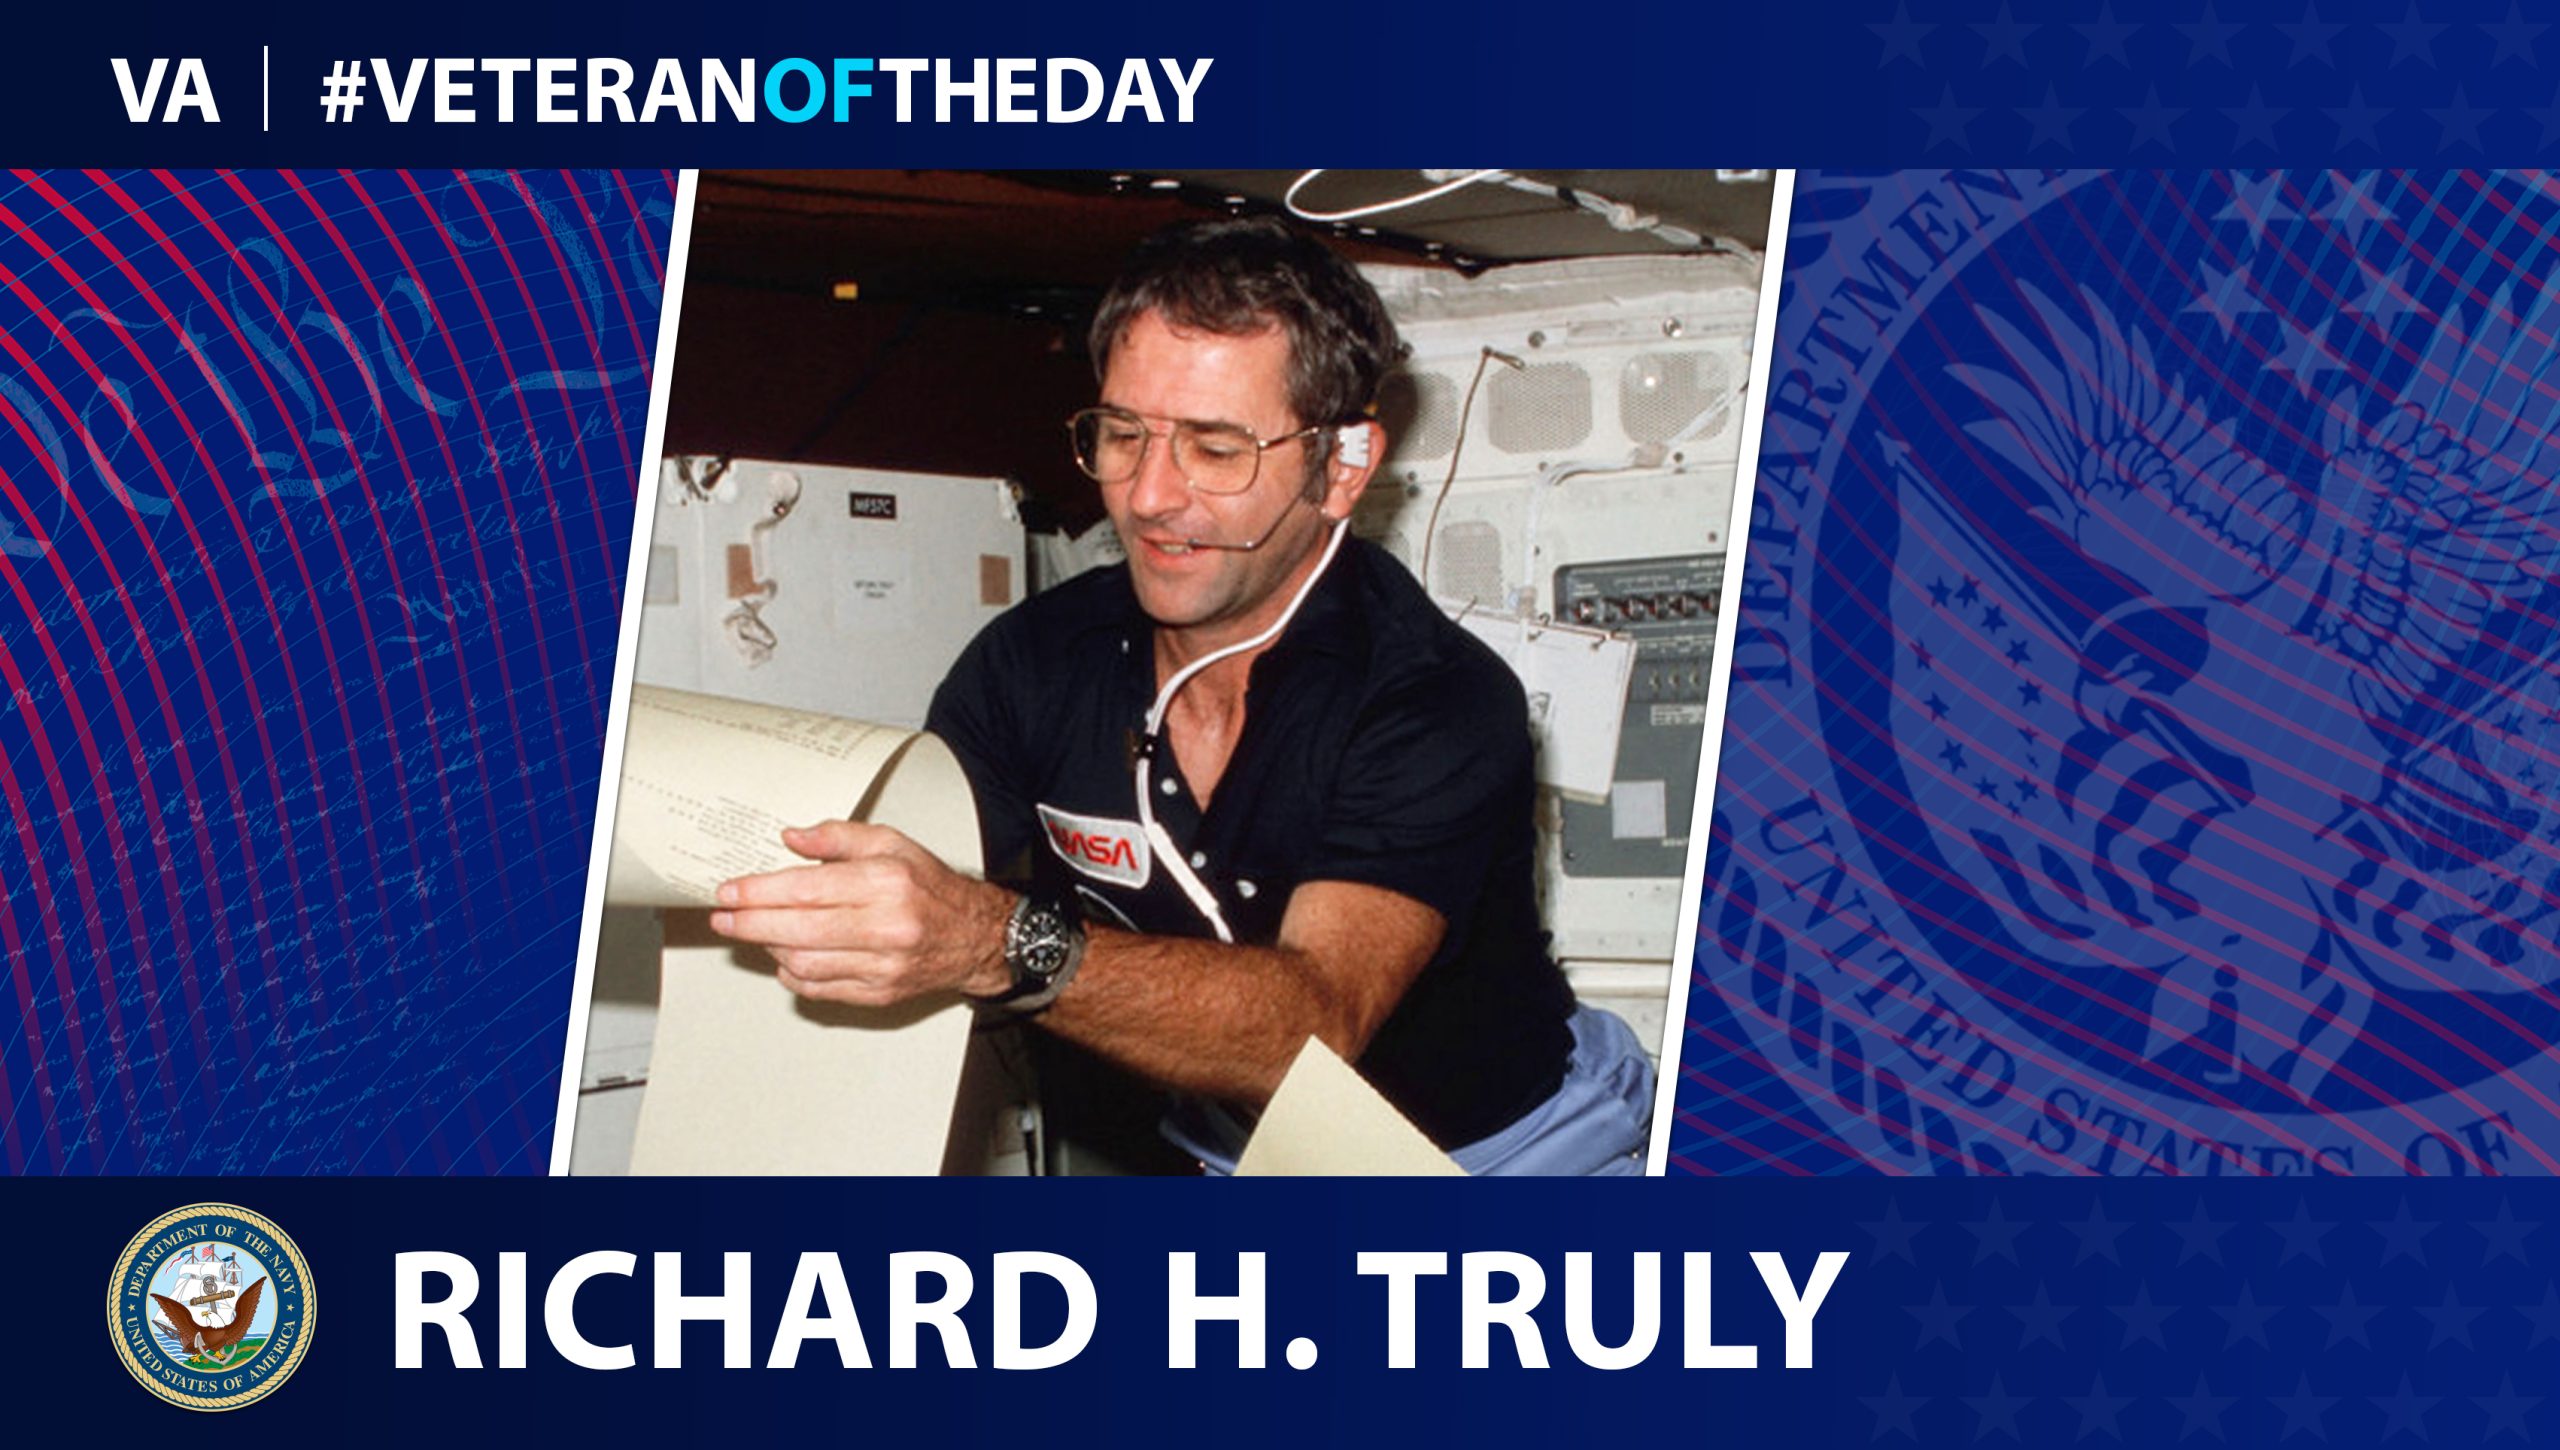 Today’s #VeteranOfTheDay is Navy Veteran and astronaut Richard H. Truly, who served from 1959 to 1992.